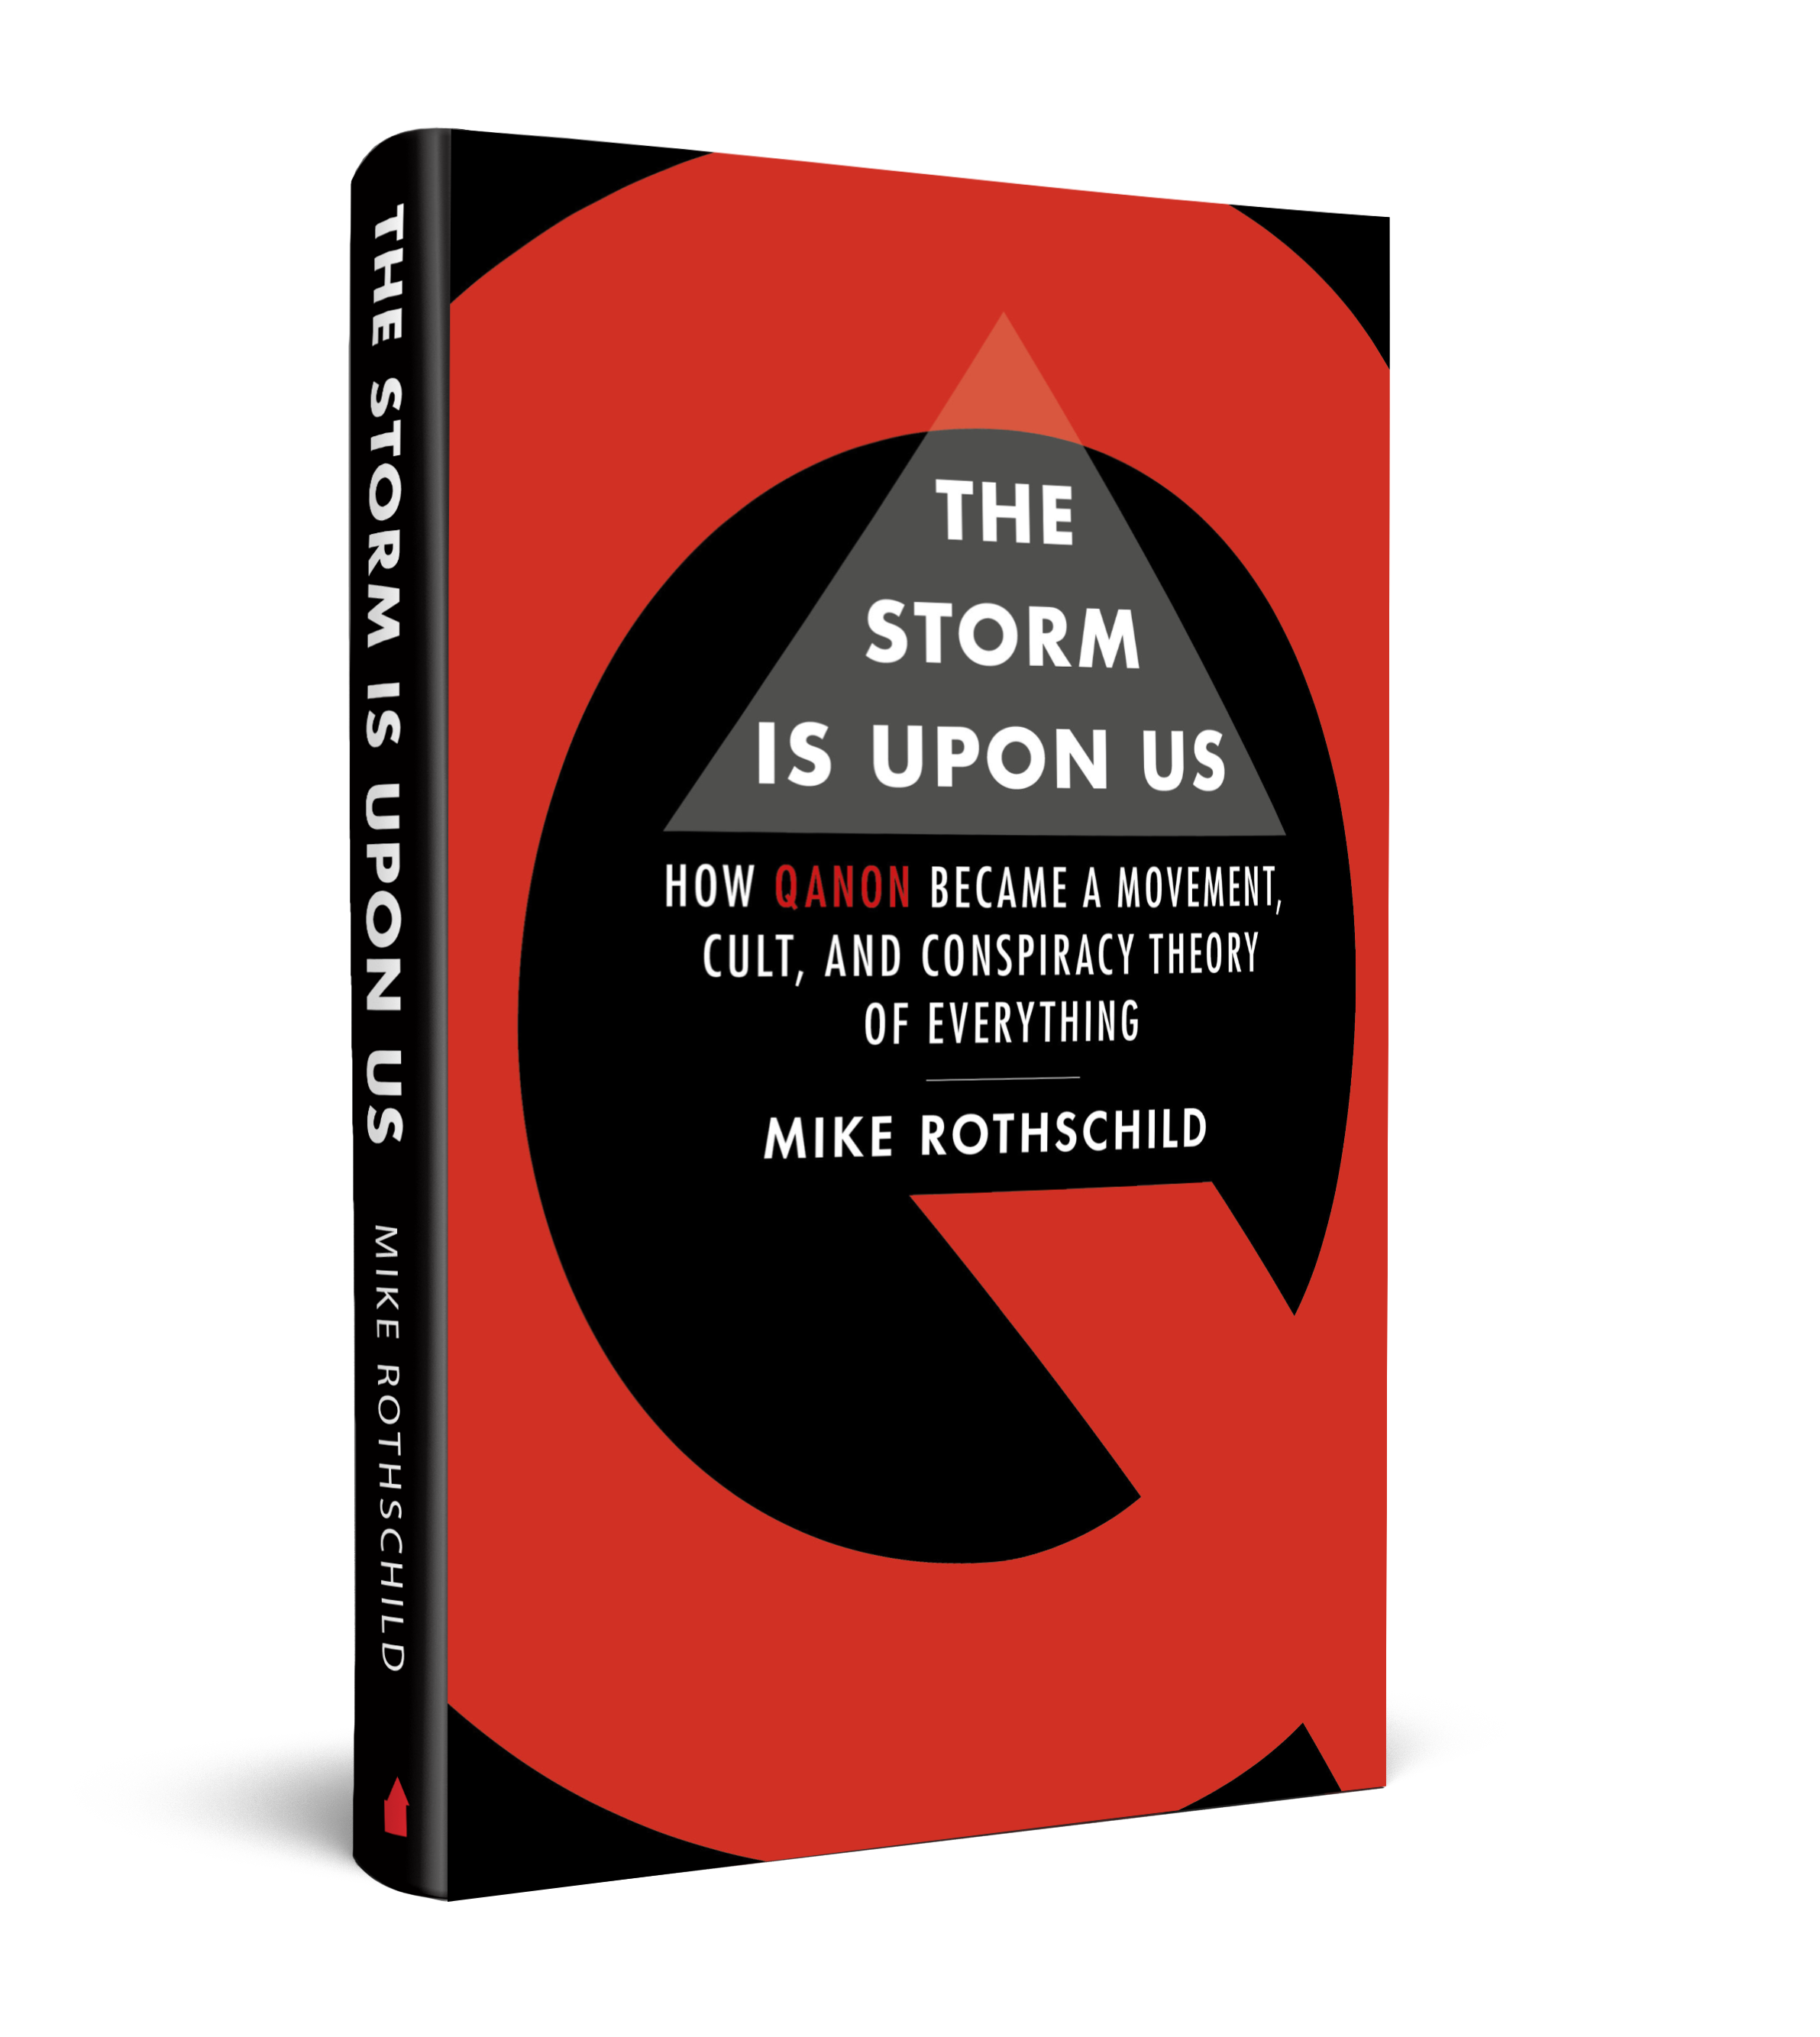 MELVILLE HOUSE ANNOUNCES 500,000 COPY PRINTING OF FIRST IN-DEPTH BOOK ABOUT QANON PHENOMENON AND ITS IMPLICATIONS FOR THE FUTURE